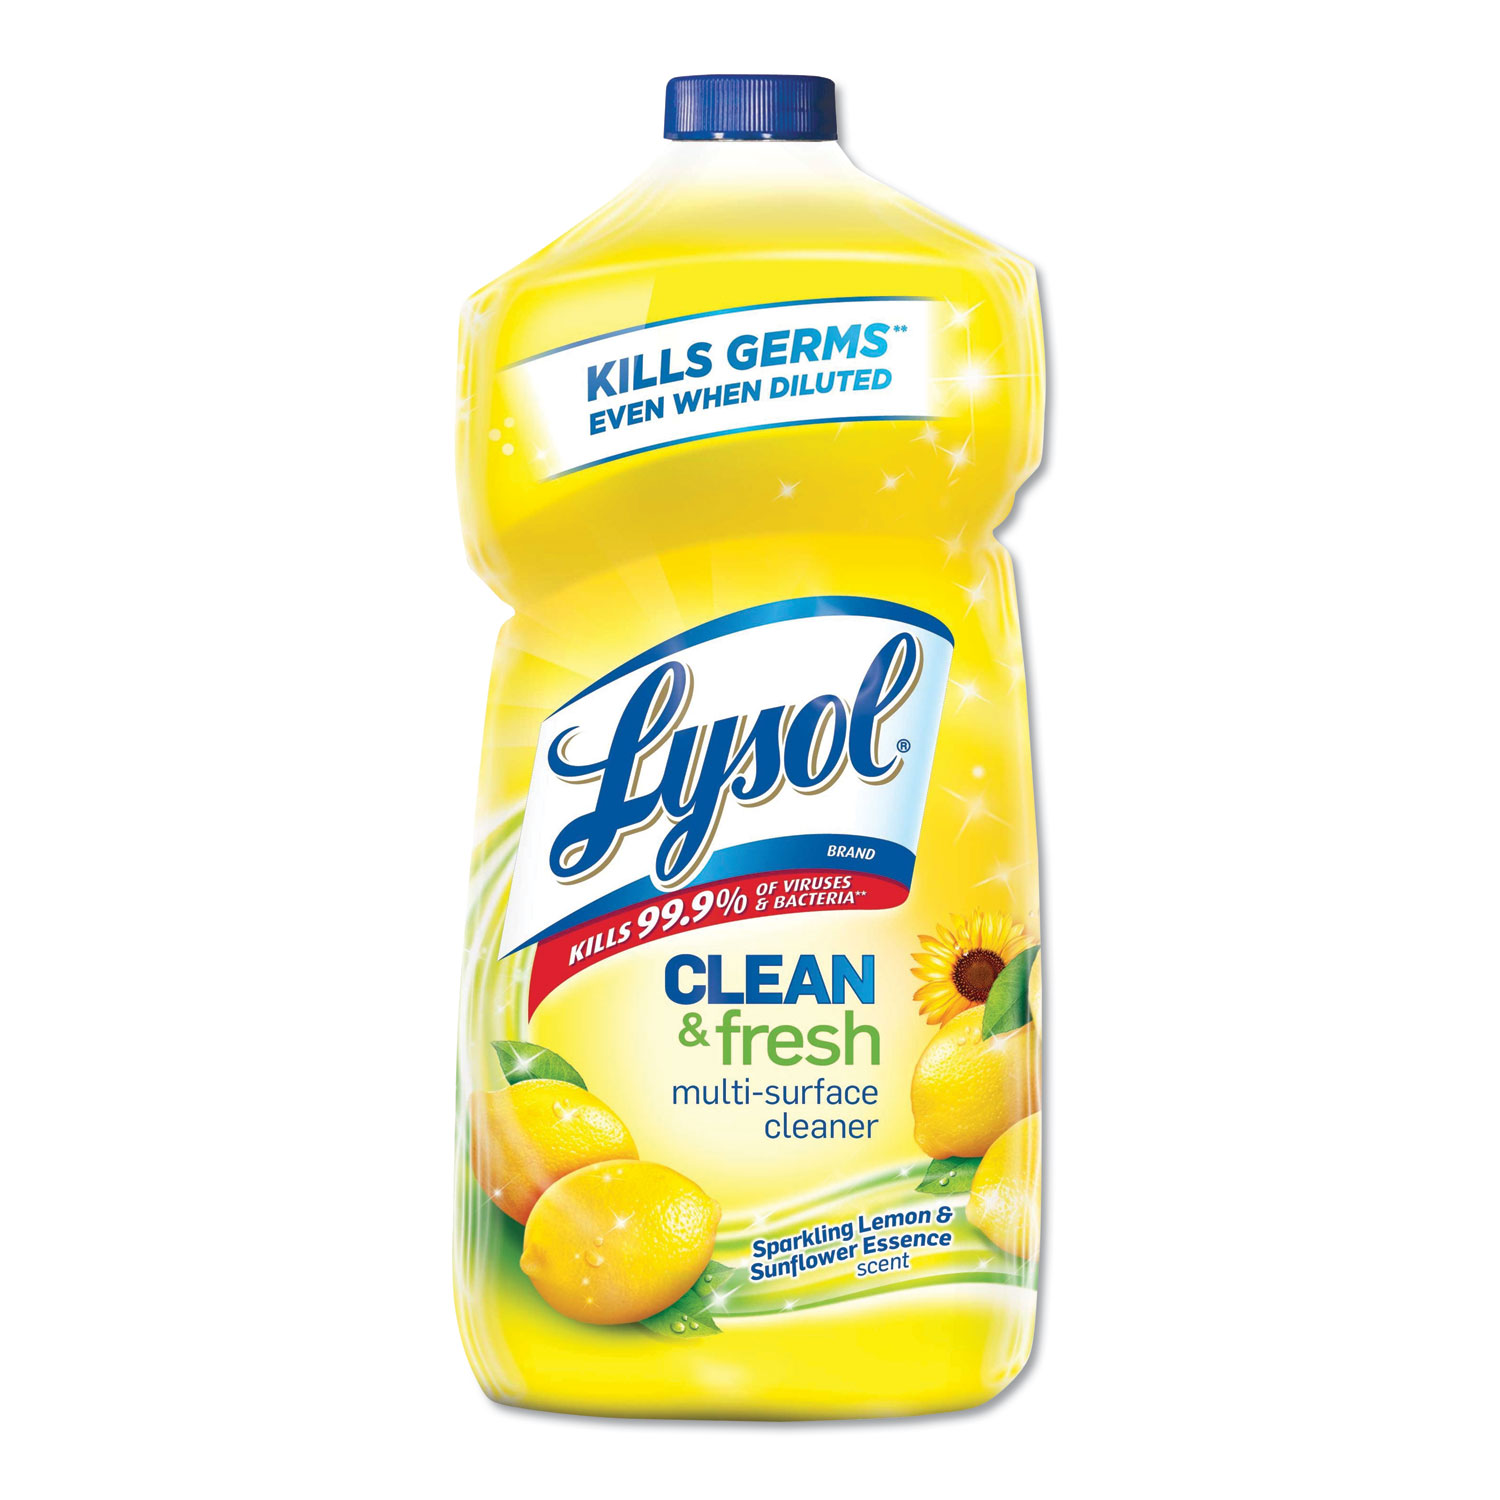  LYSOL Brand 19200-78626 Clean and Fresh Multi-Surface Cleaner, Sparkling Lemon and Sunflower Essence Scent, 40 oz Bottle (RAC78626EA) 